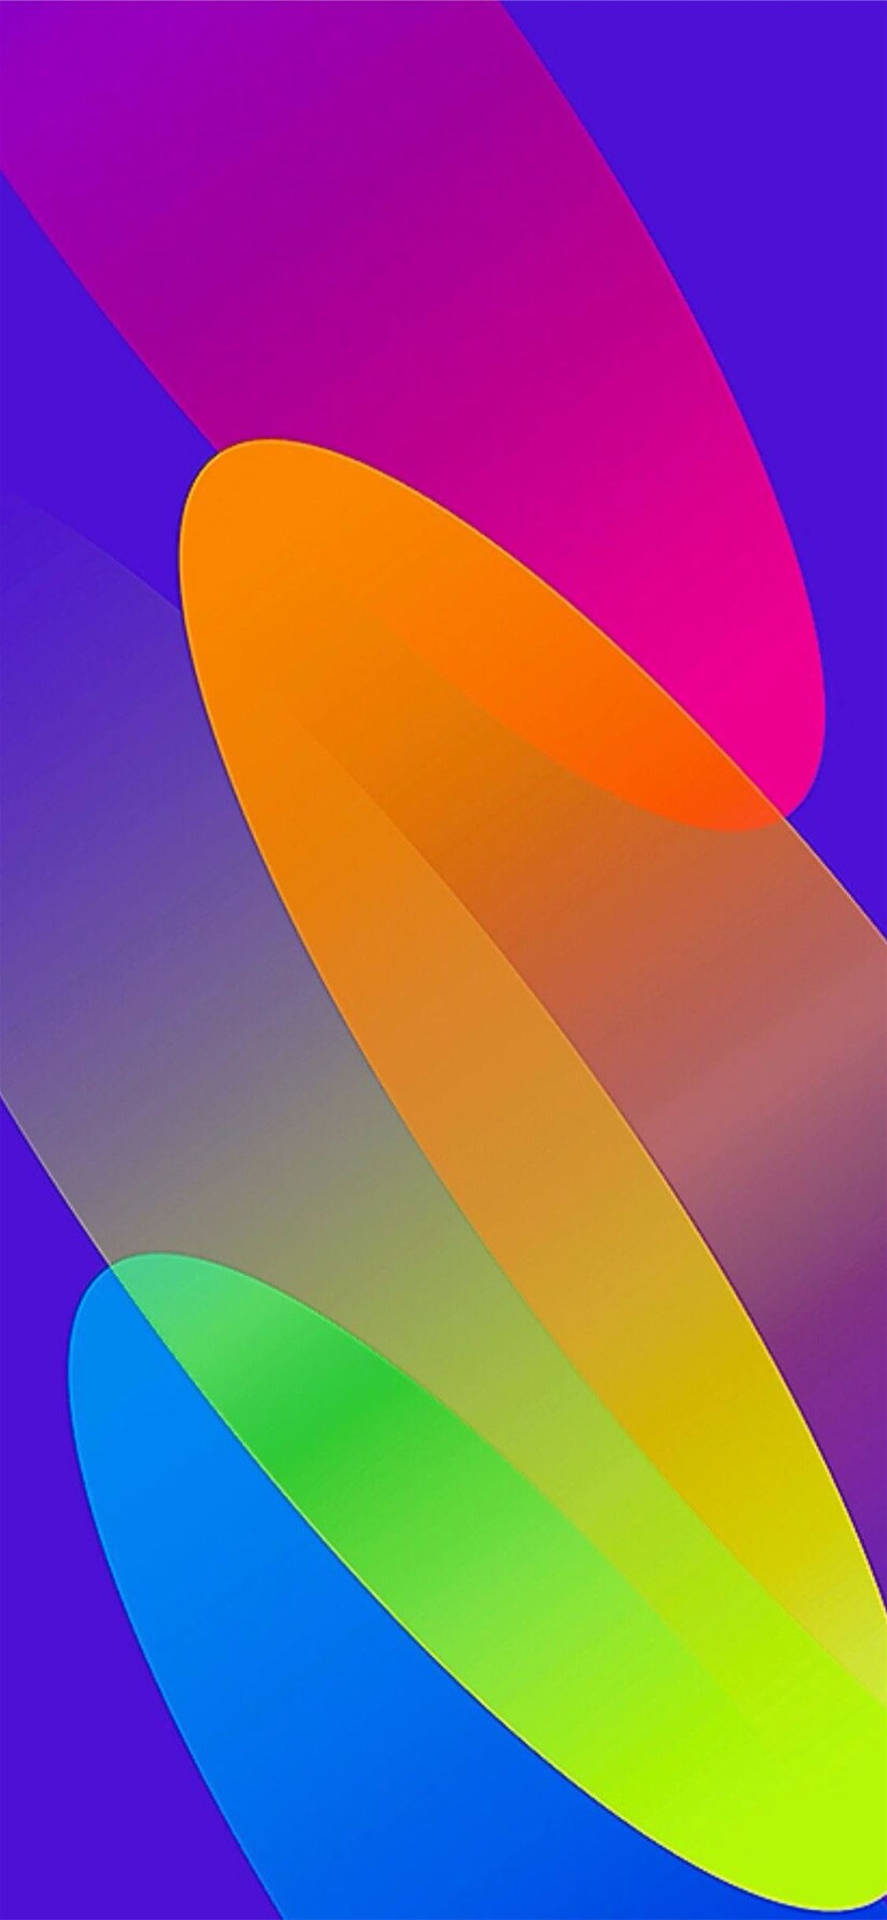 Samsung Galaxy 4k Colorful Abstract Swirly Designs Wallpaper